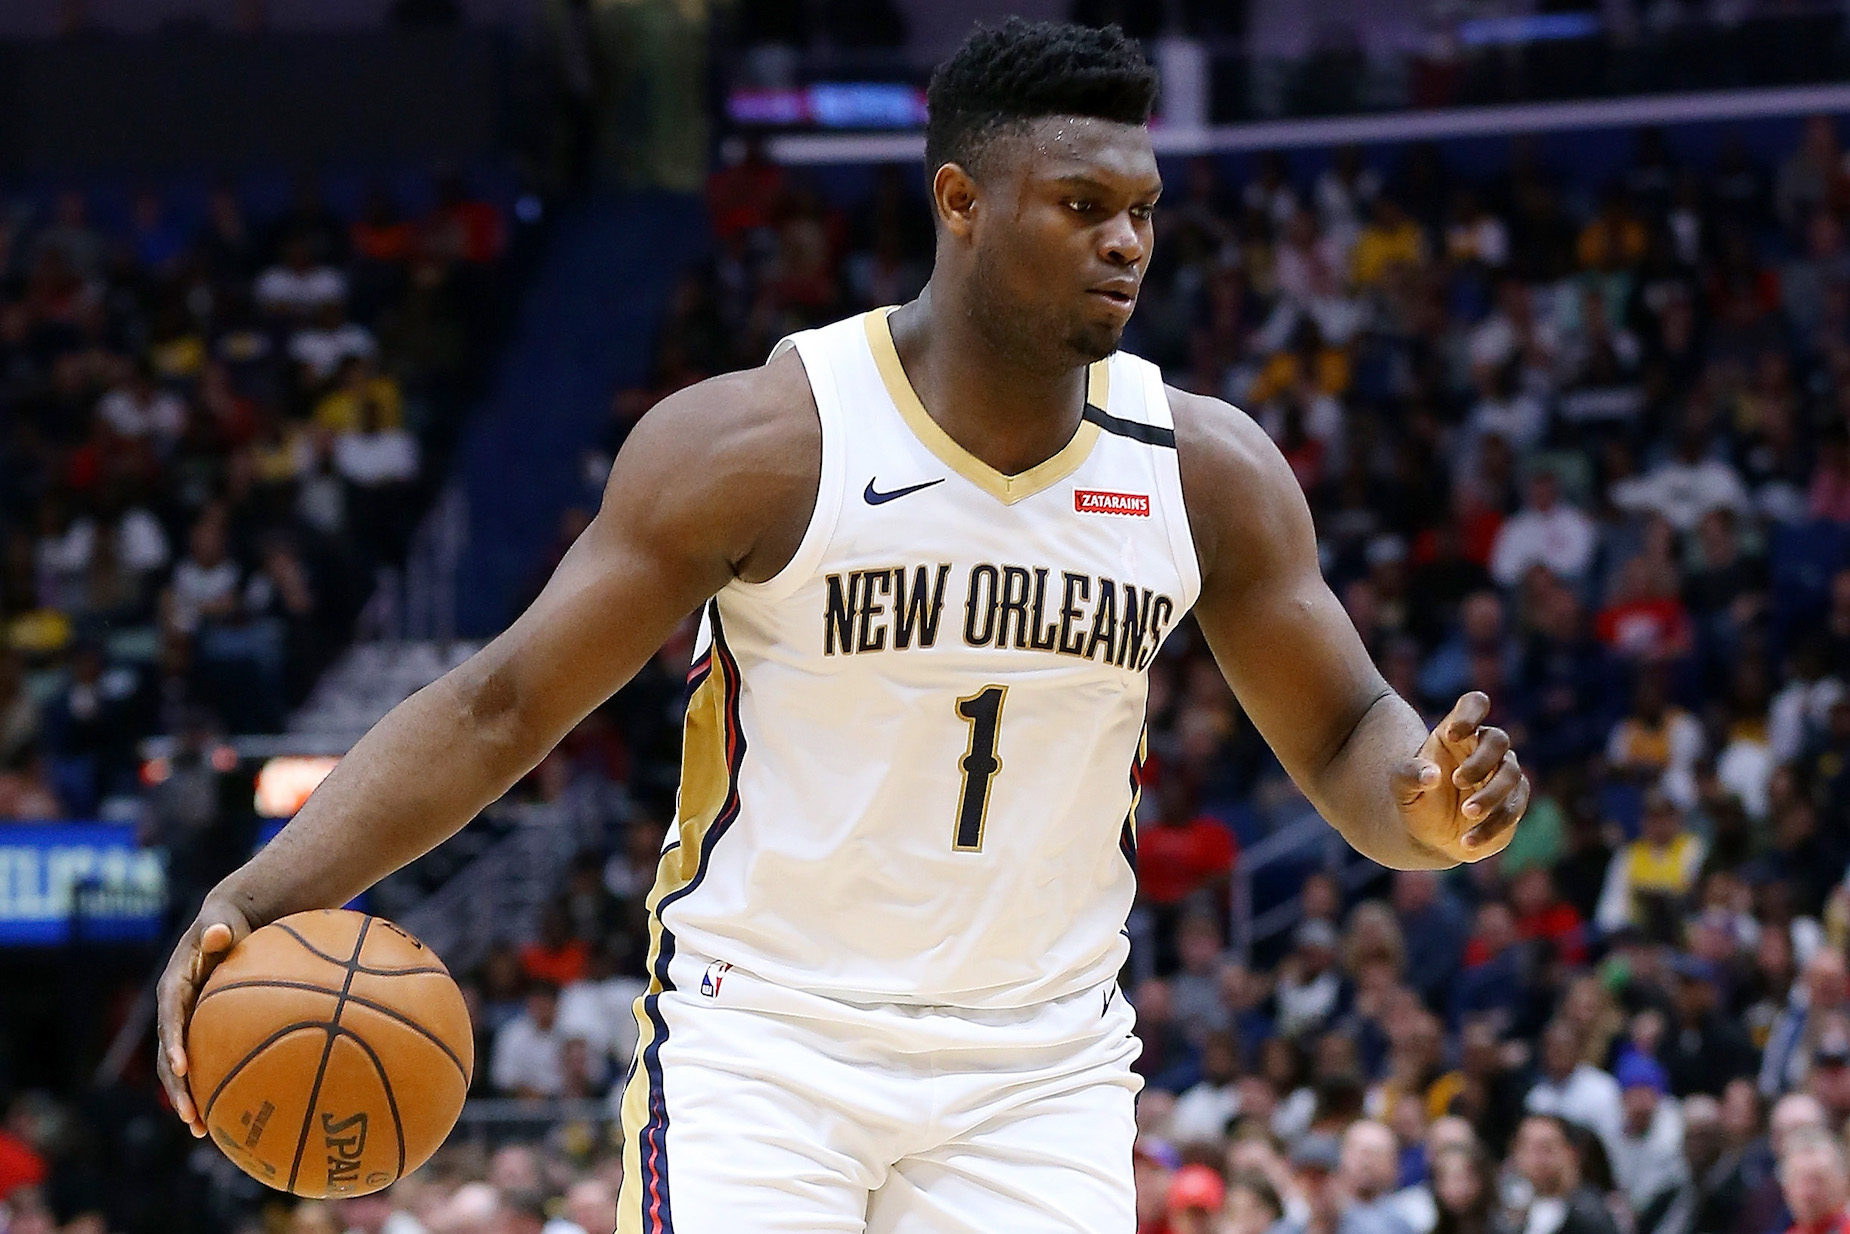 How does Zion Williamson's shoe size compare to the rest of the NBA?